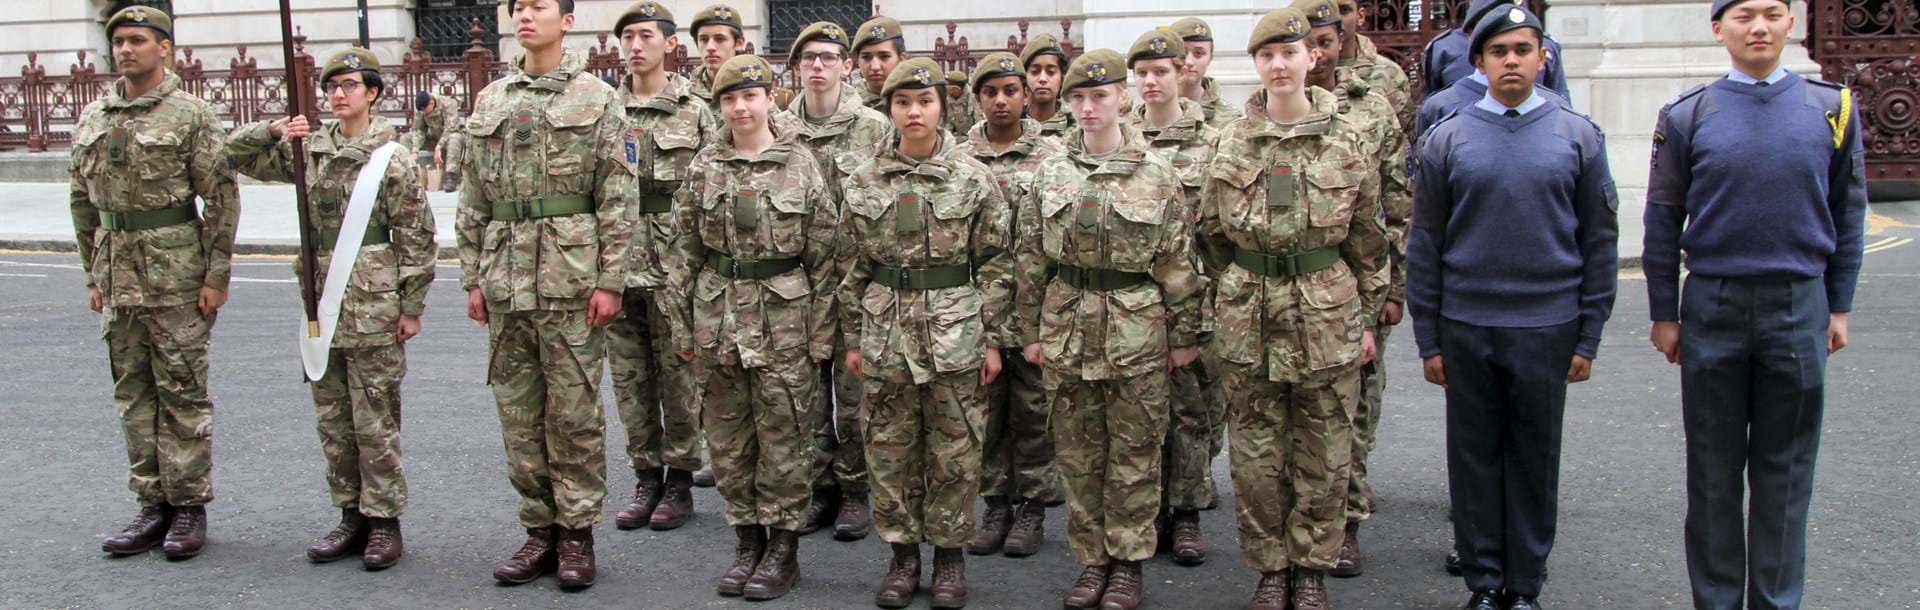 A group of cadets standing at attention in their uniform and berets 